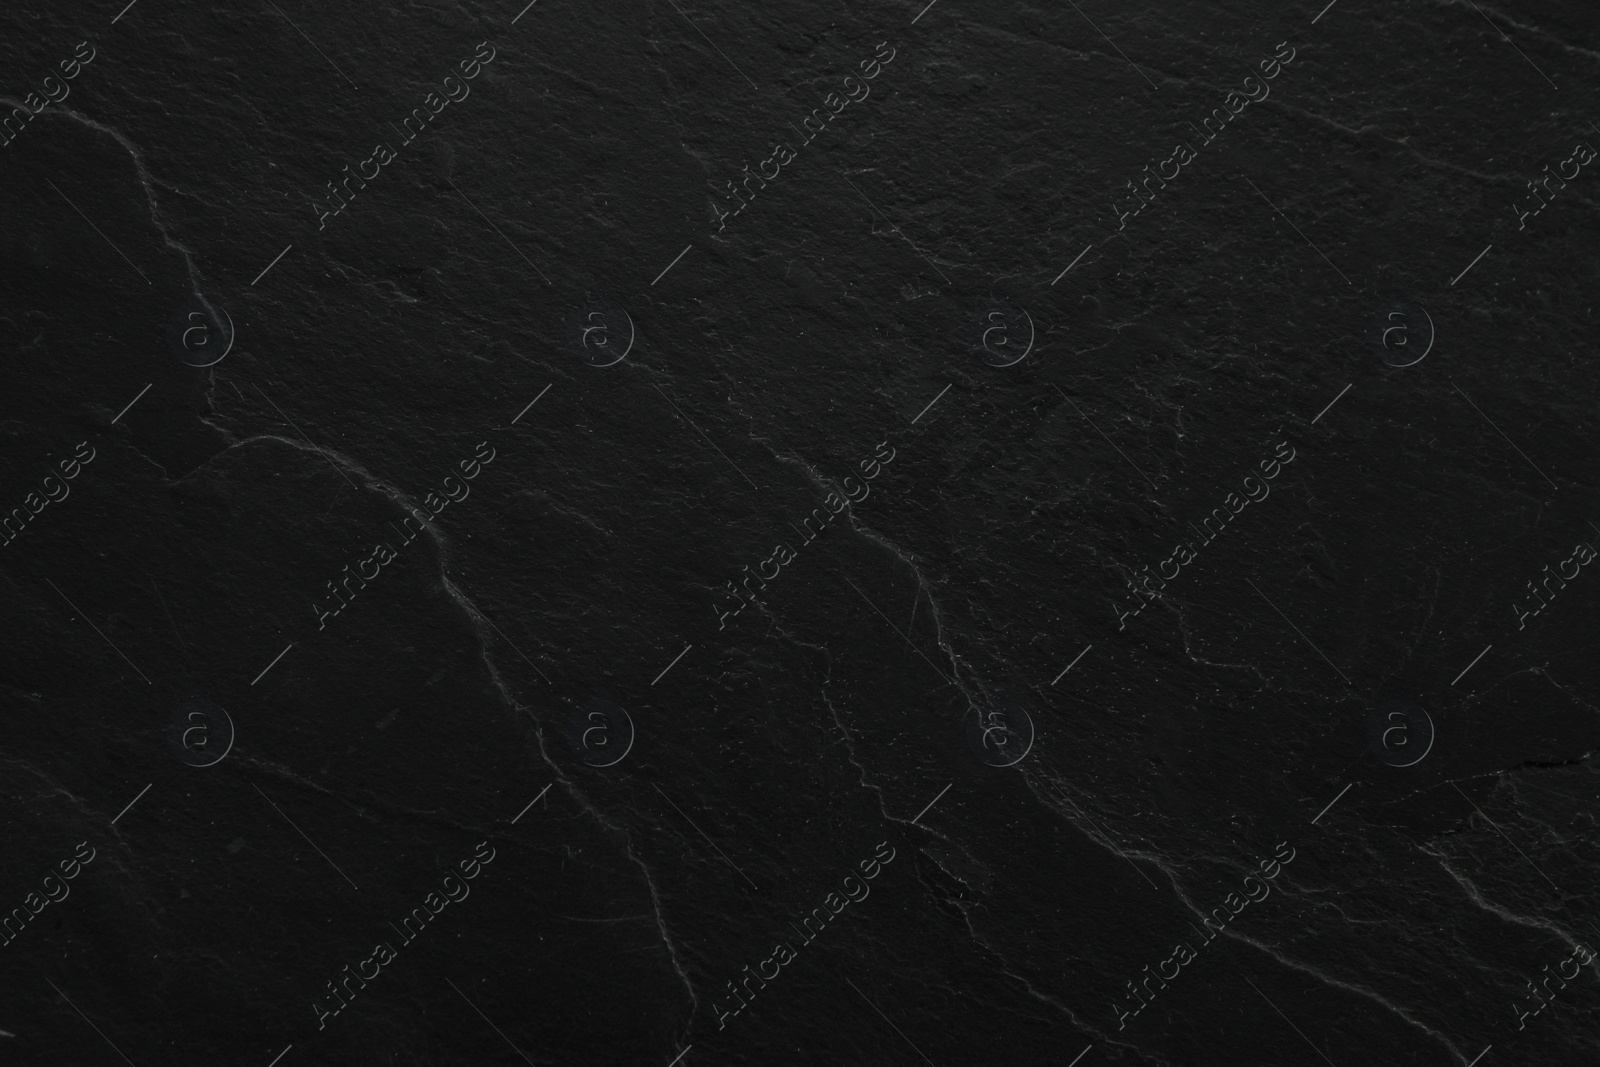 Photo of Texture of black stone surface as background, closeup